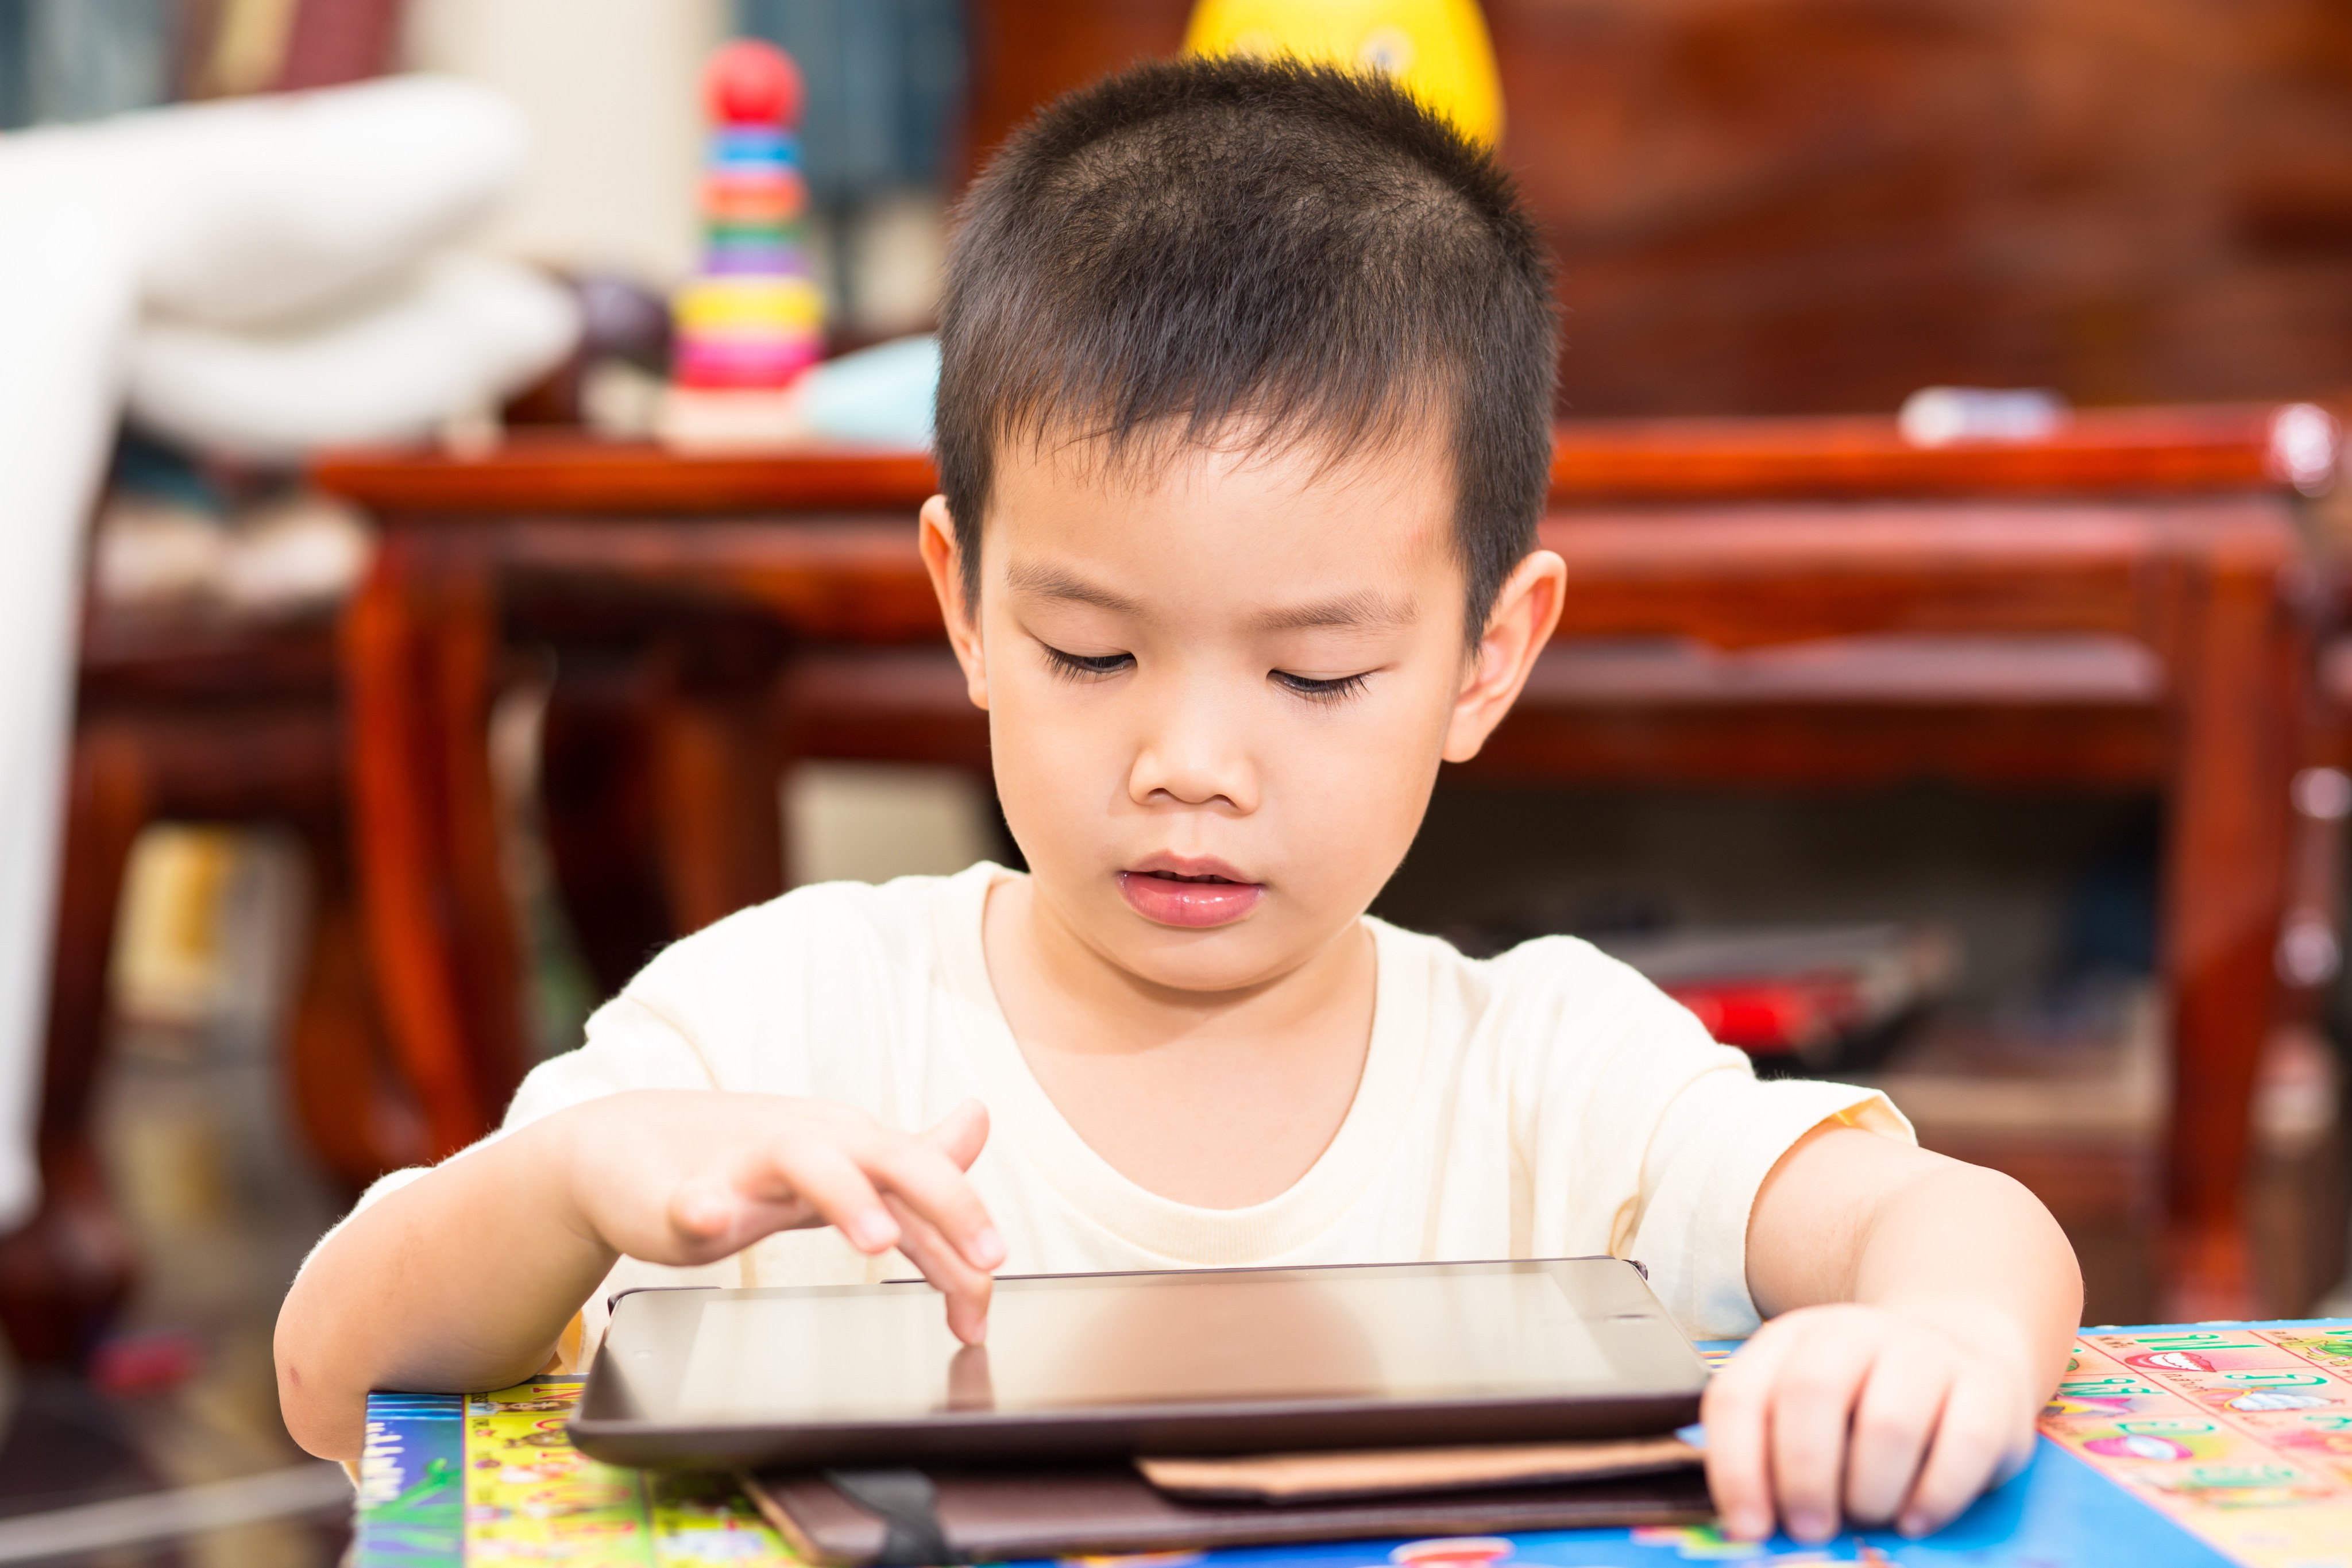 Gen Z are taking to TikTok to express their fears about raising kids who are hooked on iPads. The issue once applied to TV and video games, but whatever the device, too much screen time does affect early childhood development. Photo: Shutterstock